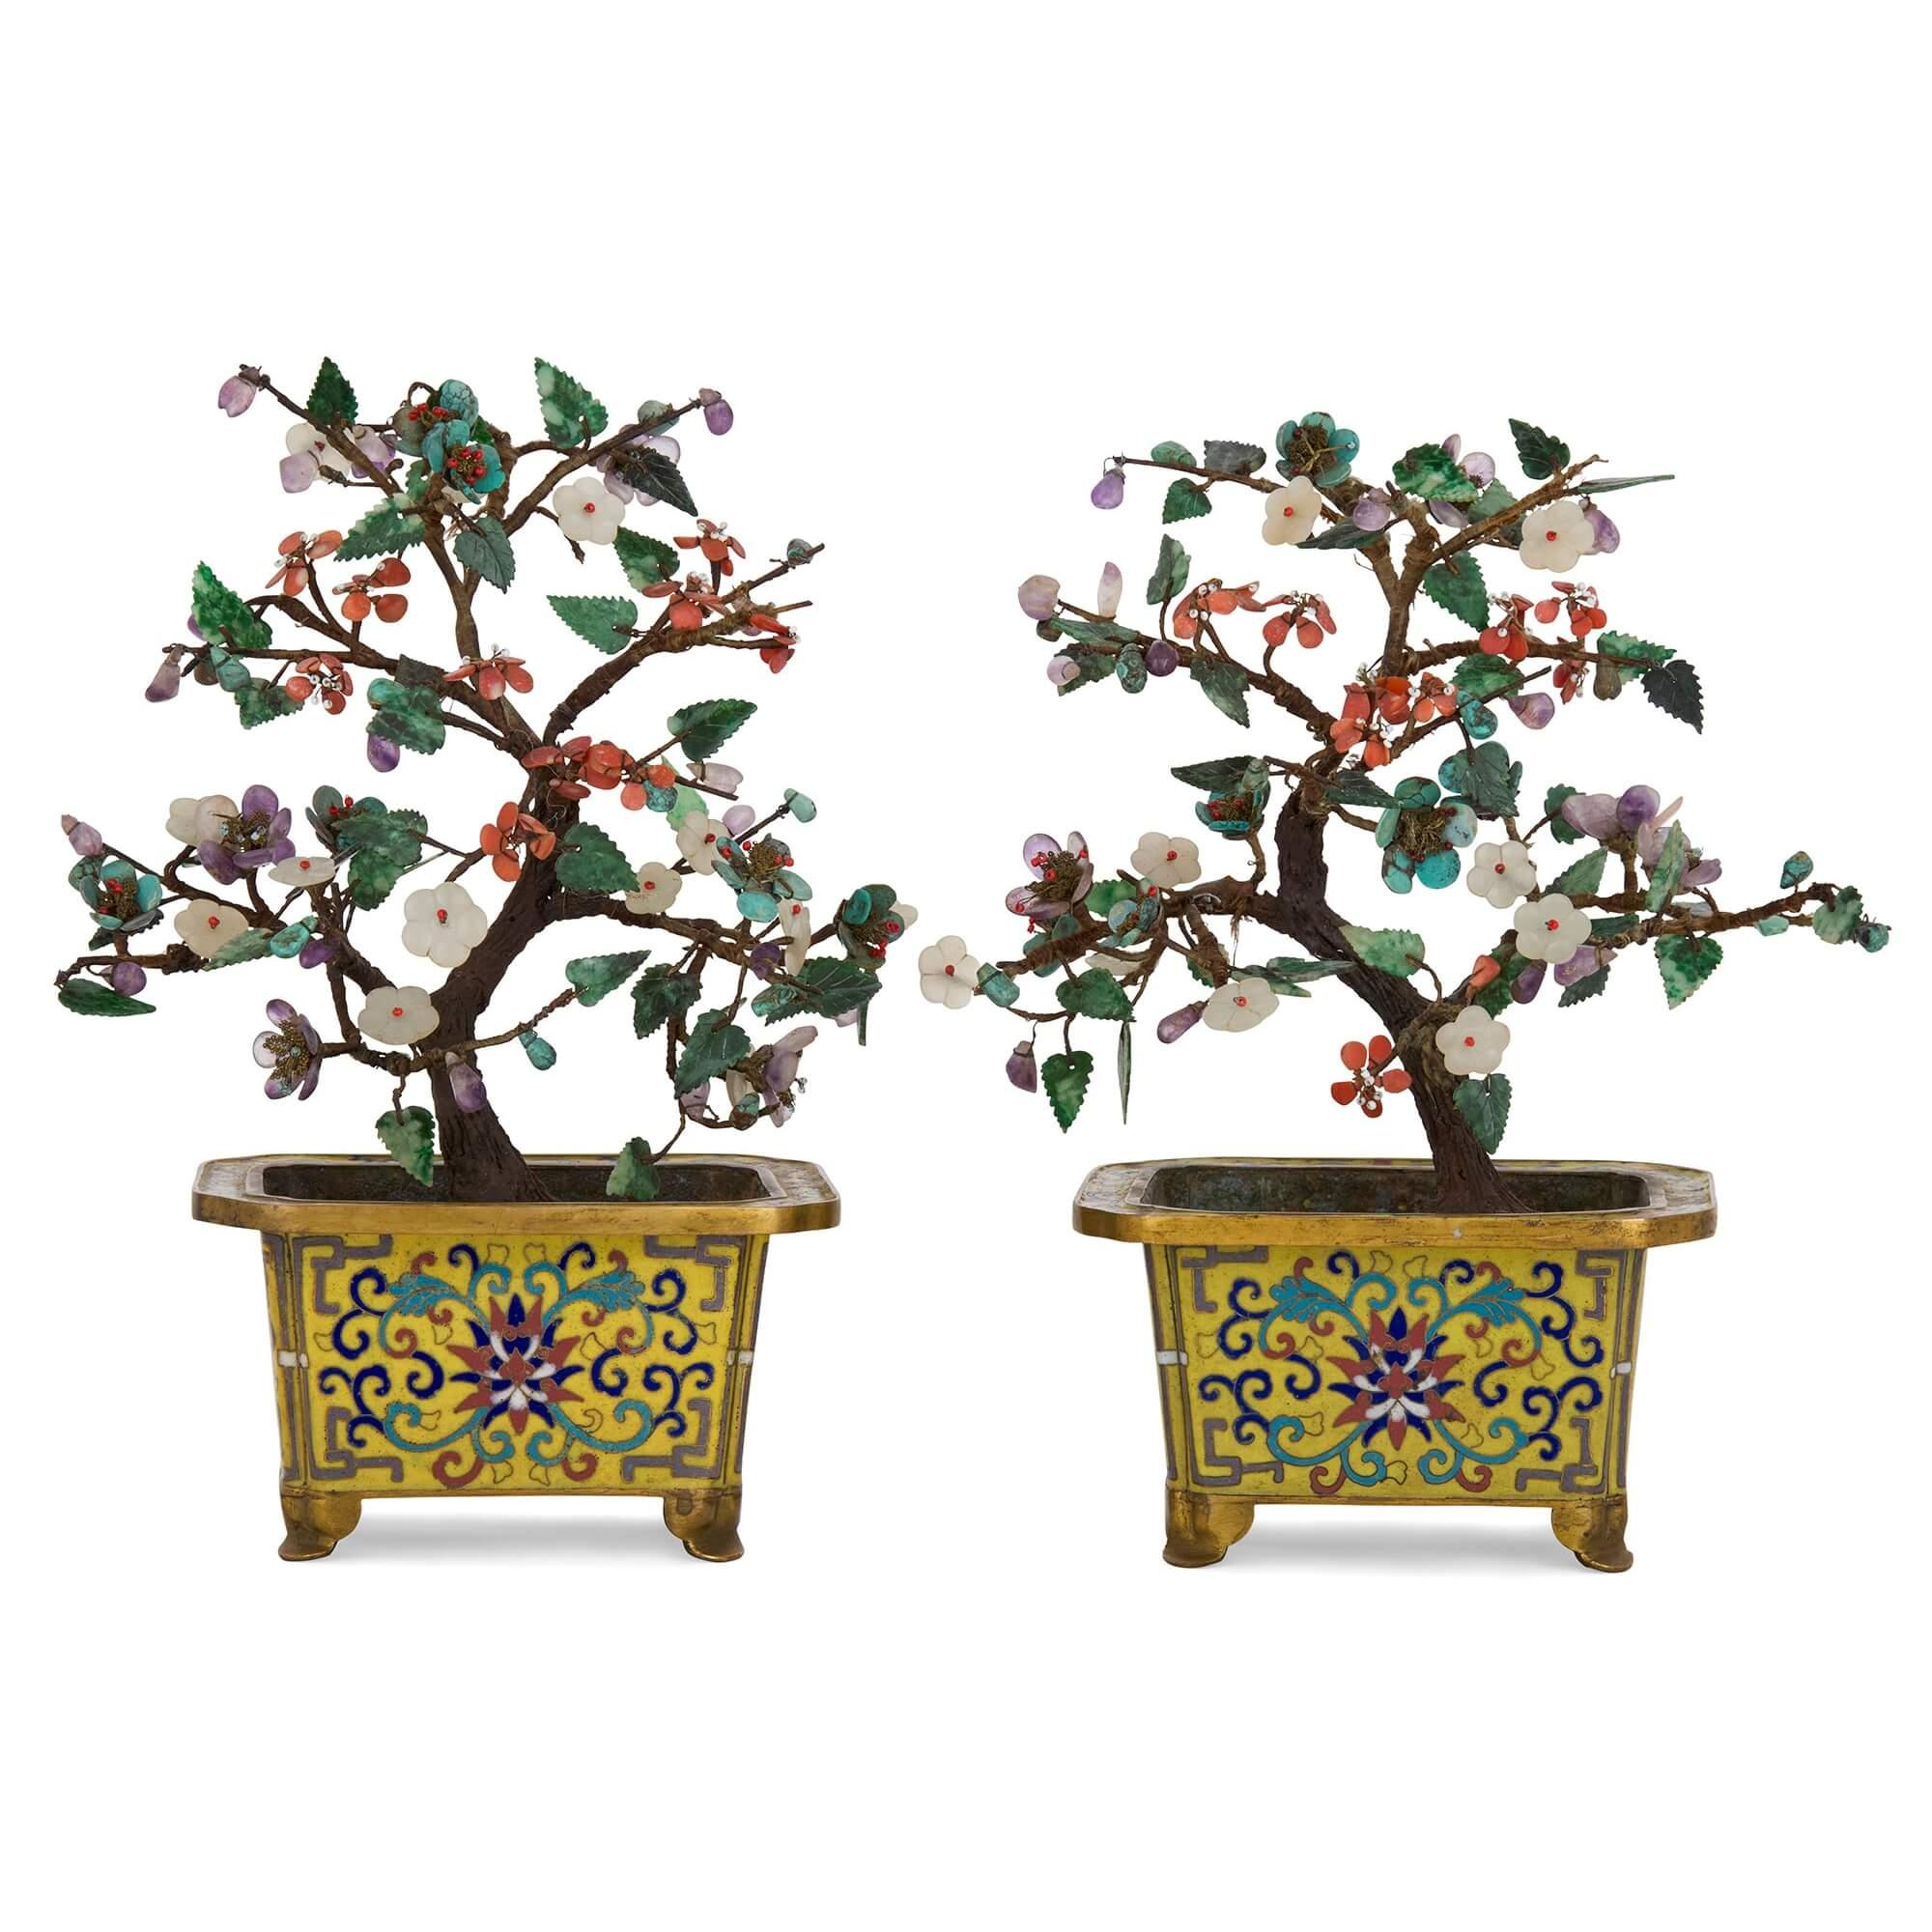 Pair of Chinese hardstone, jade and cloisonné enamel flower tree models
Chinese, 20th Century
Height 24cm, width 18cm, depth 10cm

This pair of charming Chinese models depicts flower trees and is crafted from a large array of high quality materials.